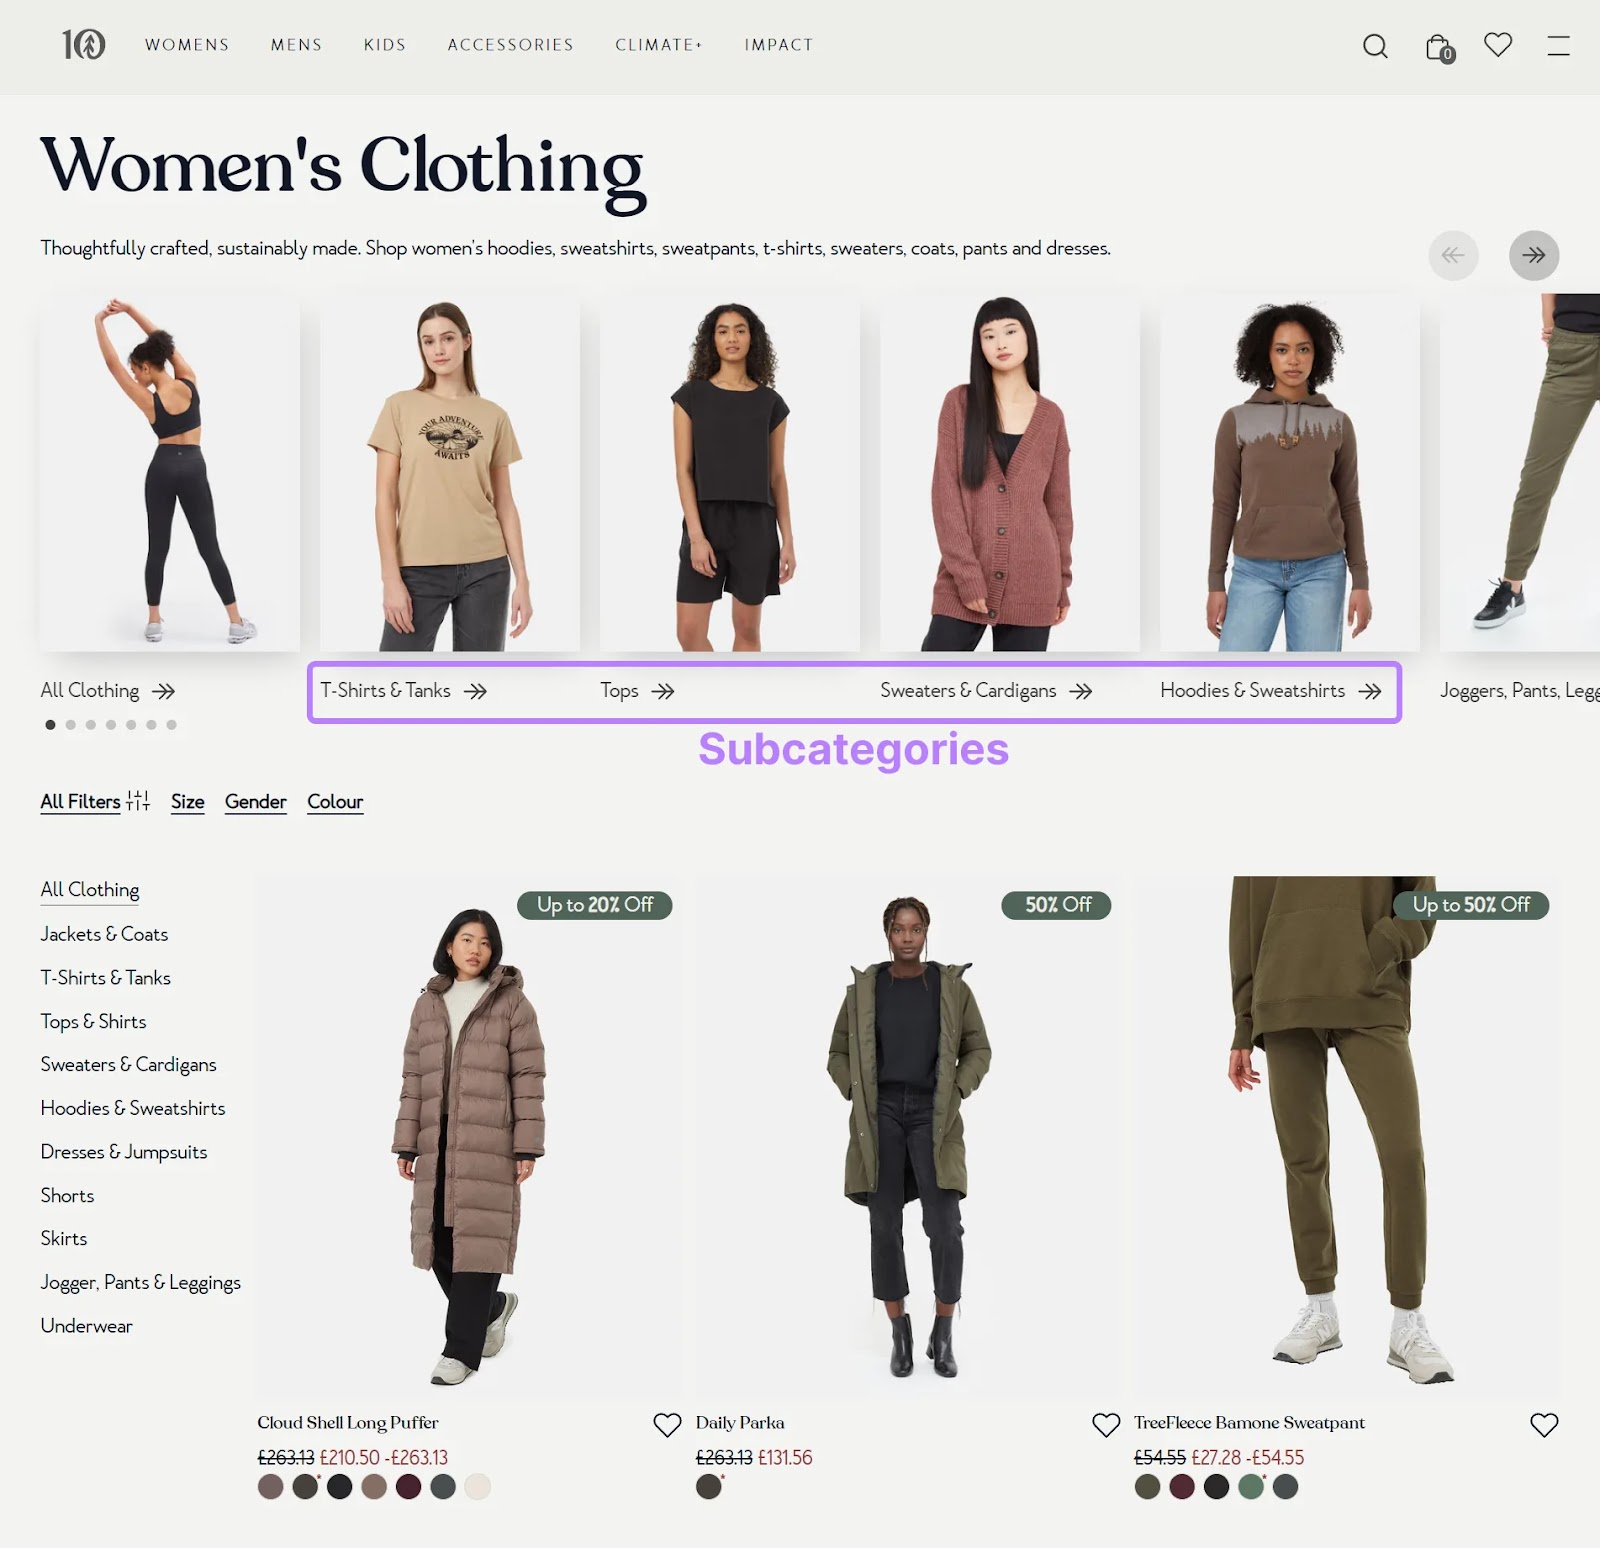 Women’s clothing page with subcategories “T-Shirts & Tanks,” “Tops,” and “Sweaters & Cardigans" highlighted